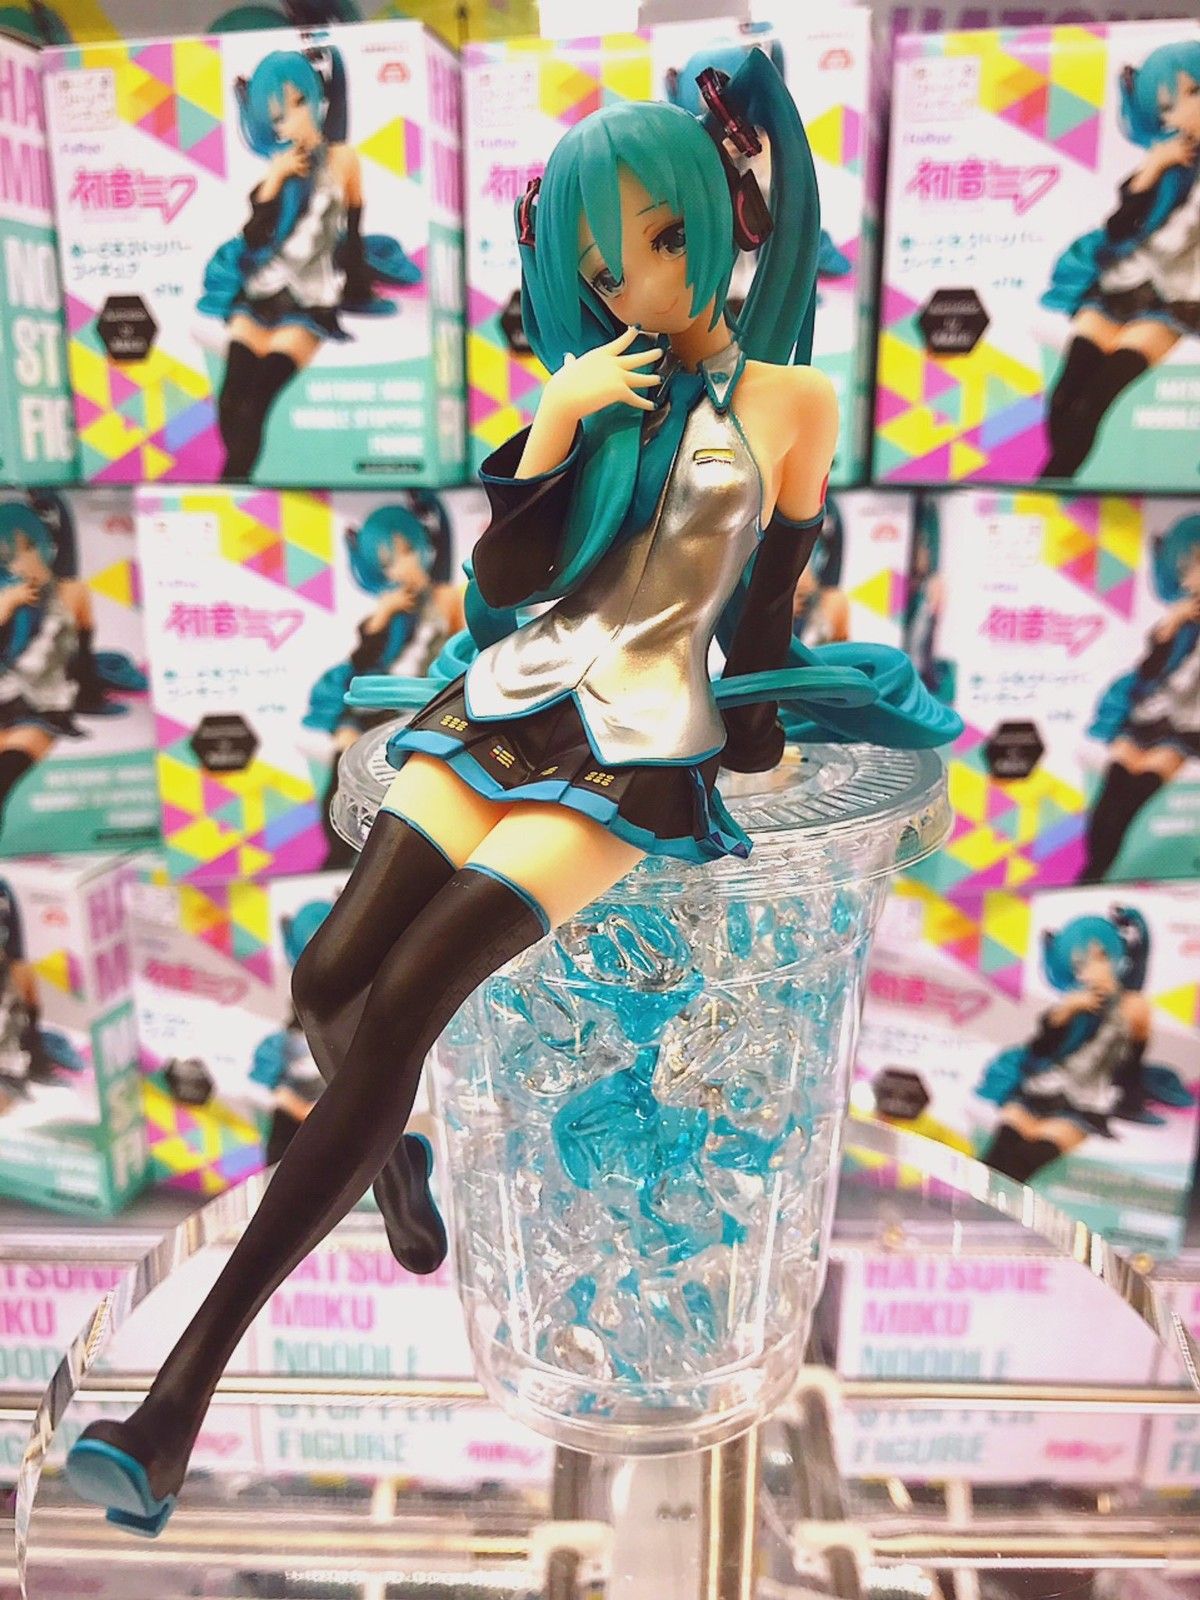 [Hatsune Miku] Nuyoru Stopper Figure, too much color and become a topic erotic 12